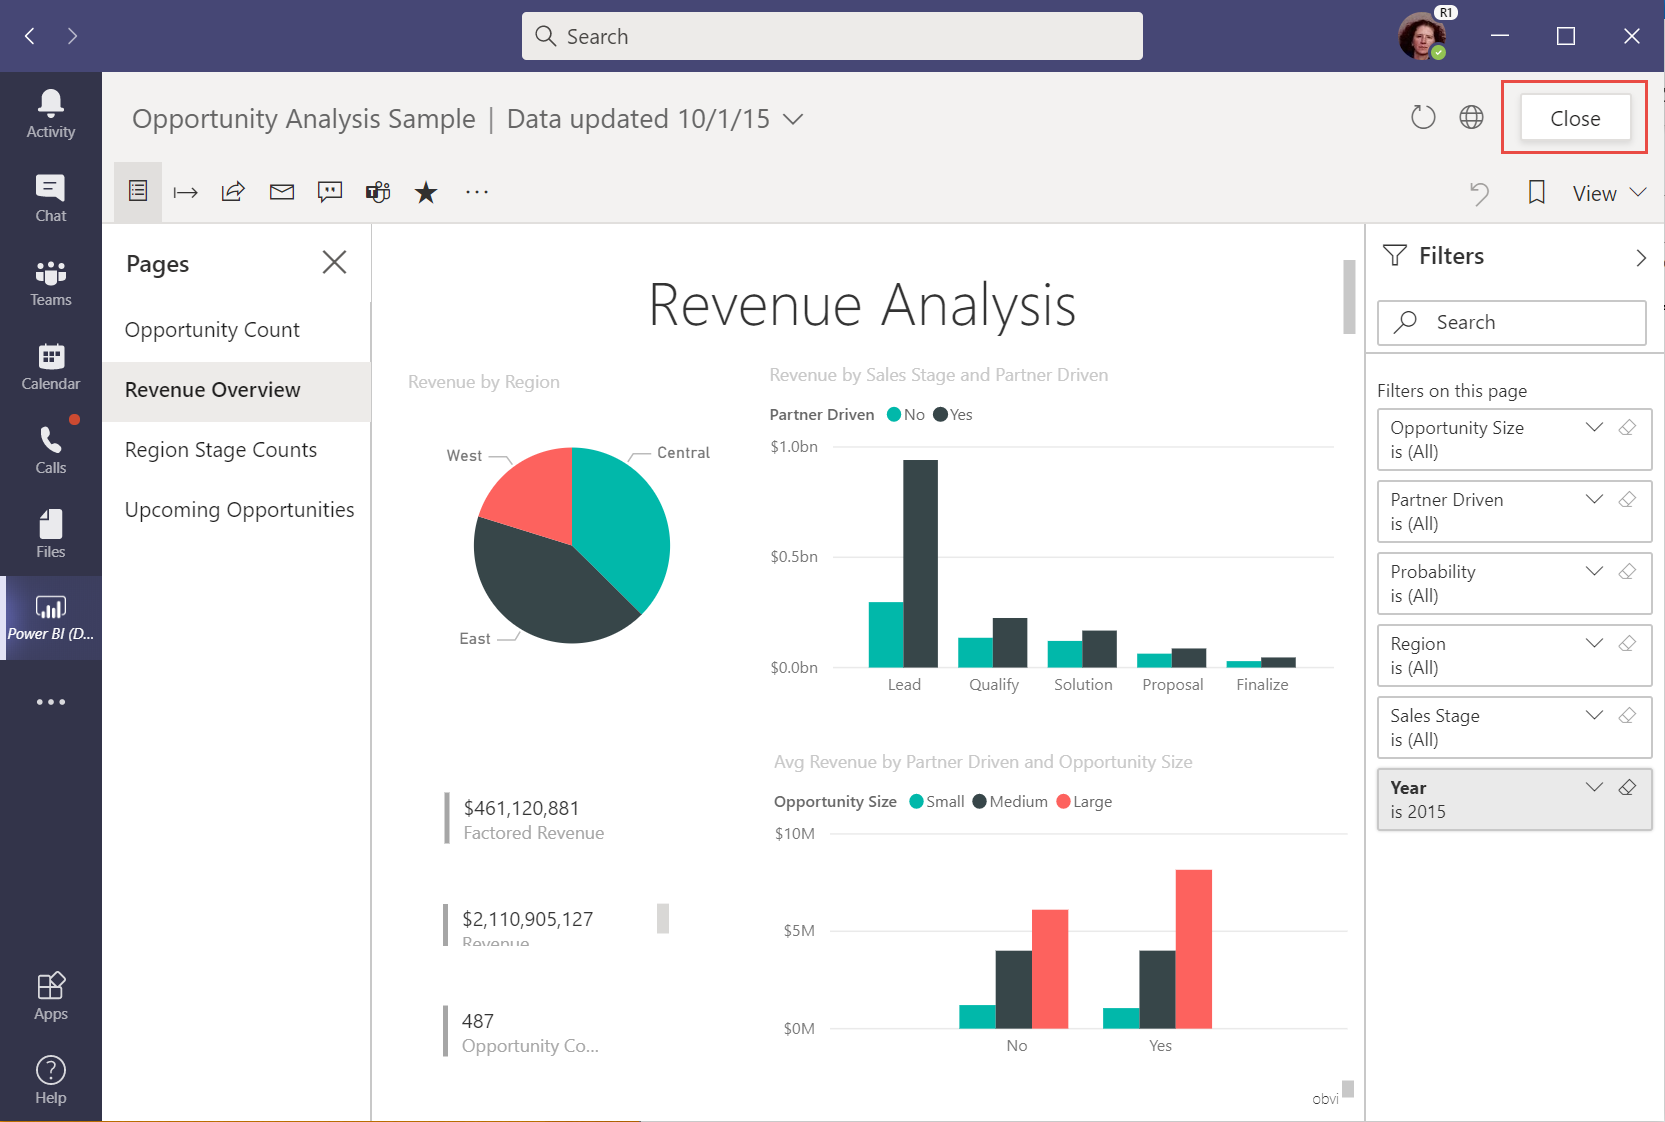 Screenshot of the Opportunity Analysis Sample report in Power BI app in Microsoft Teams with Close button selected.